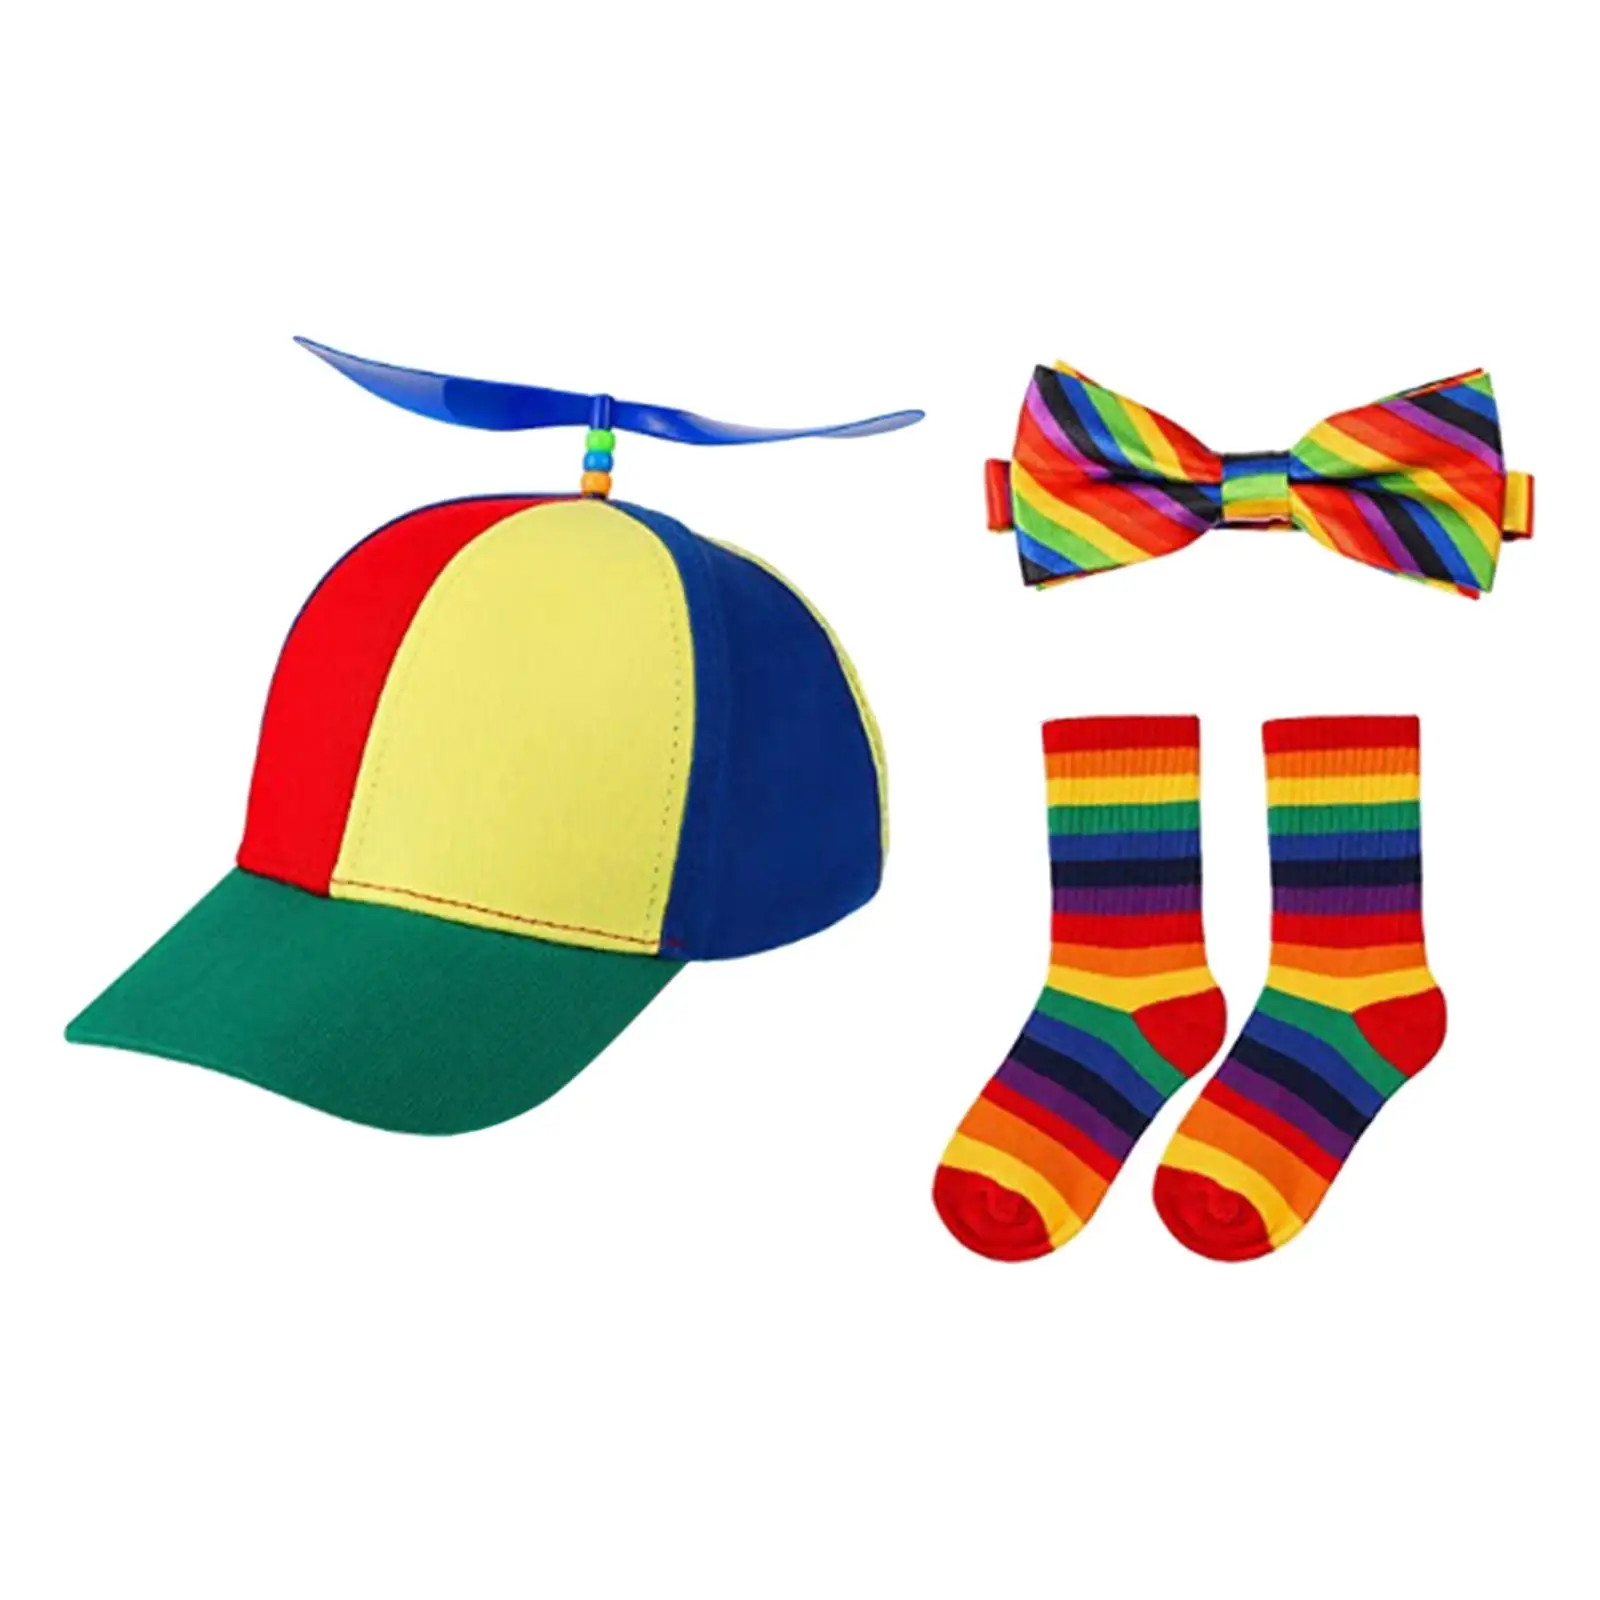 Child Baseball Hat Set Novelty Gift Colorful Adjustable Kids hat Socks Bow Tie for Casual Camping Boys Costume Outdoor